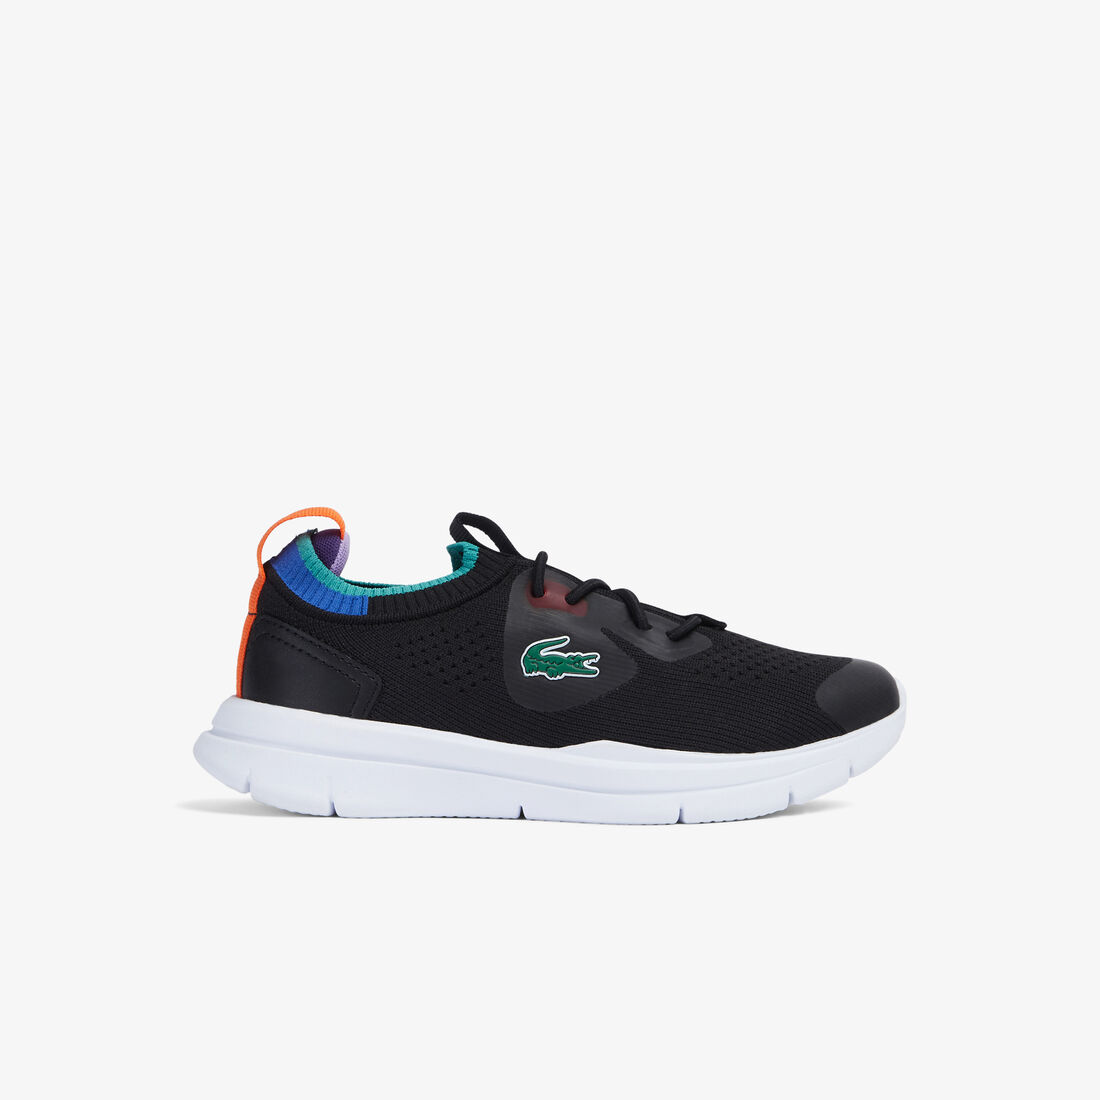 Children's Lacoste Run Spin Knit Textile Color Contrast Sneakers